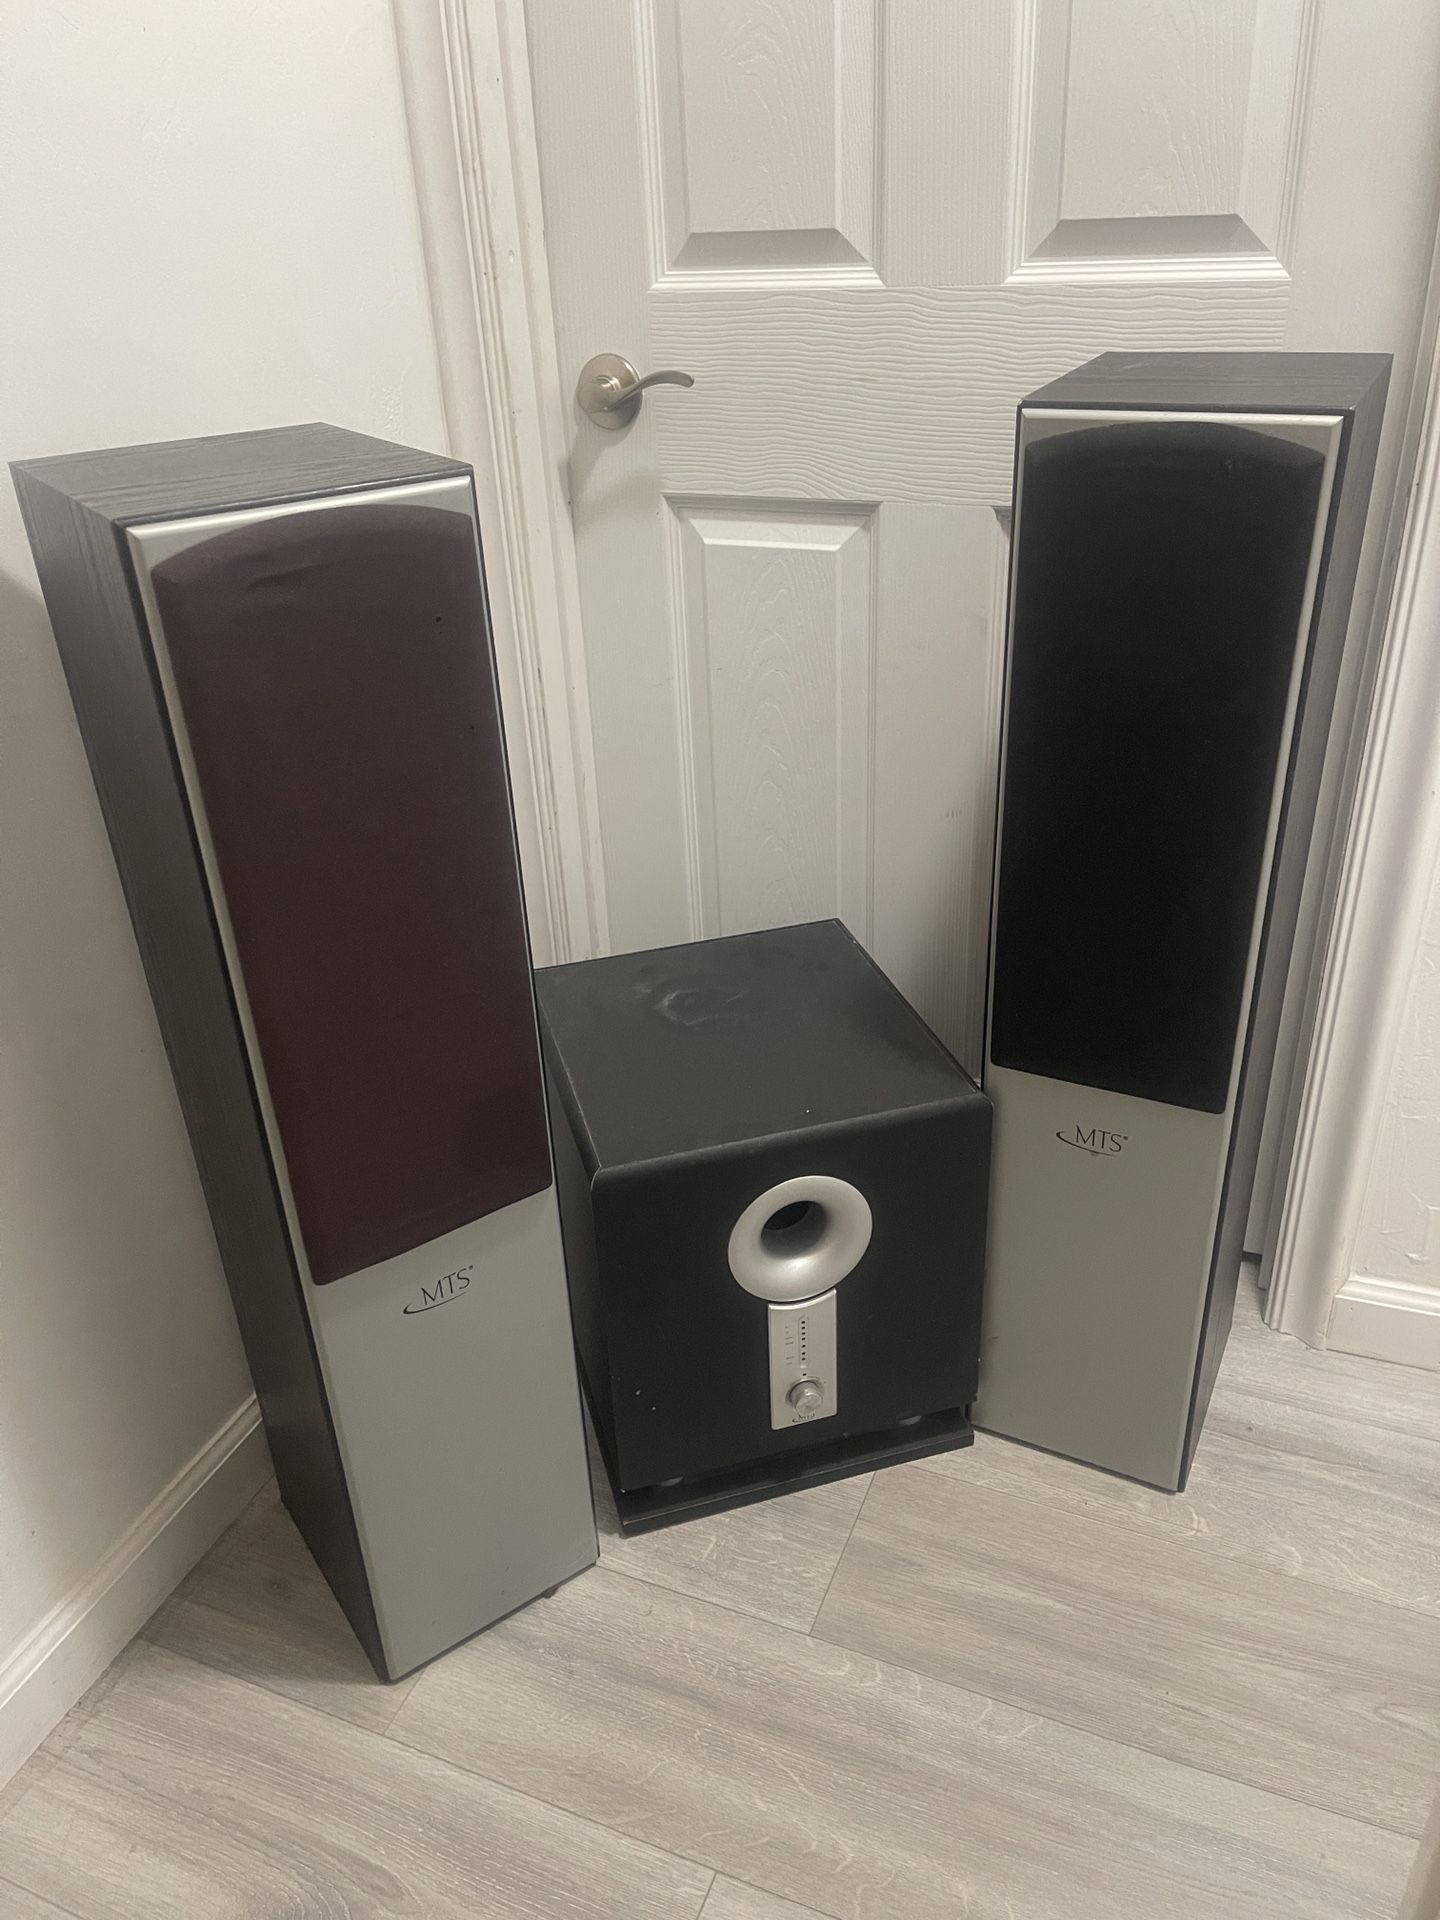 MTS-2605 Millennium Theater tower Speakers set on sale. moving must sell, good condition